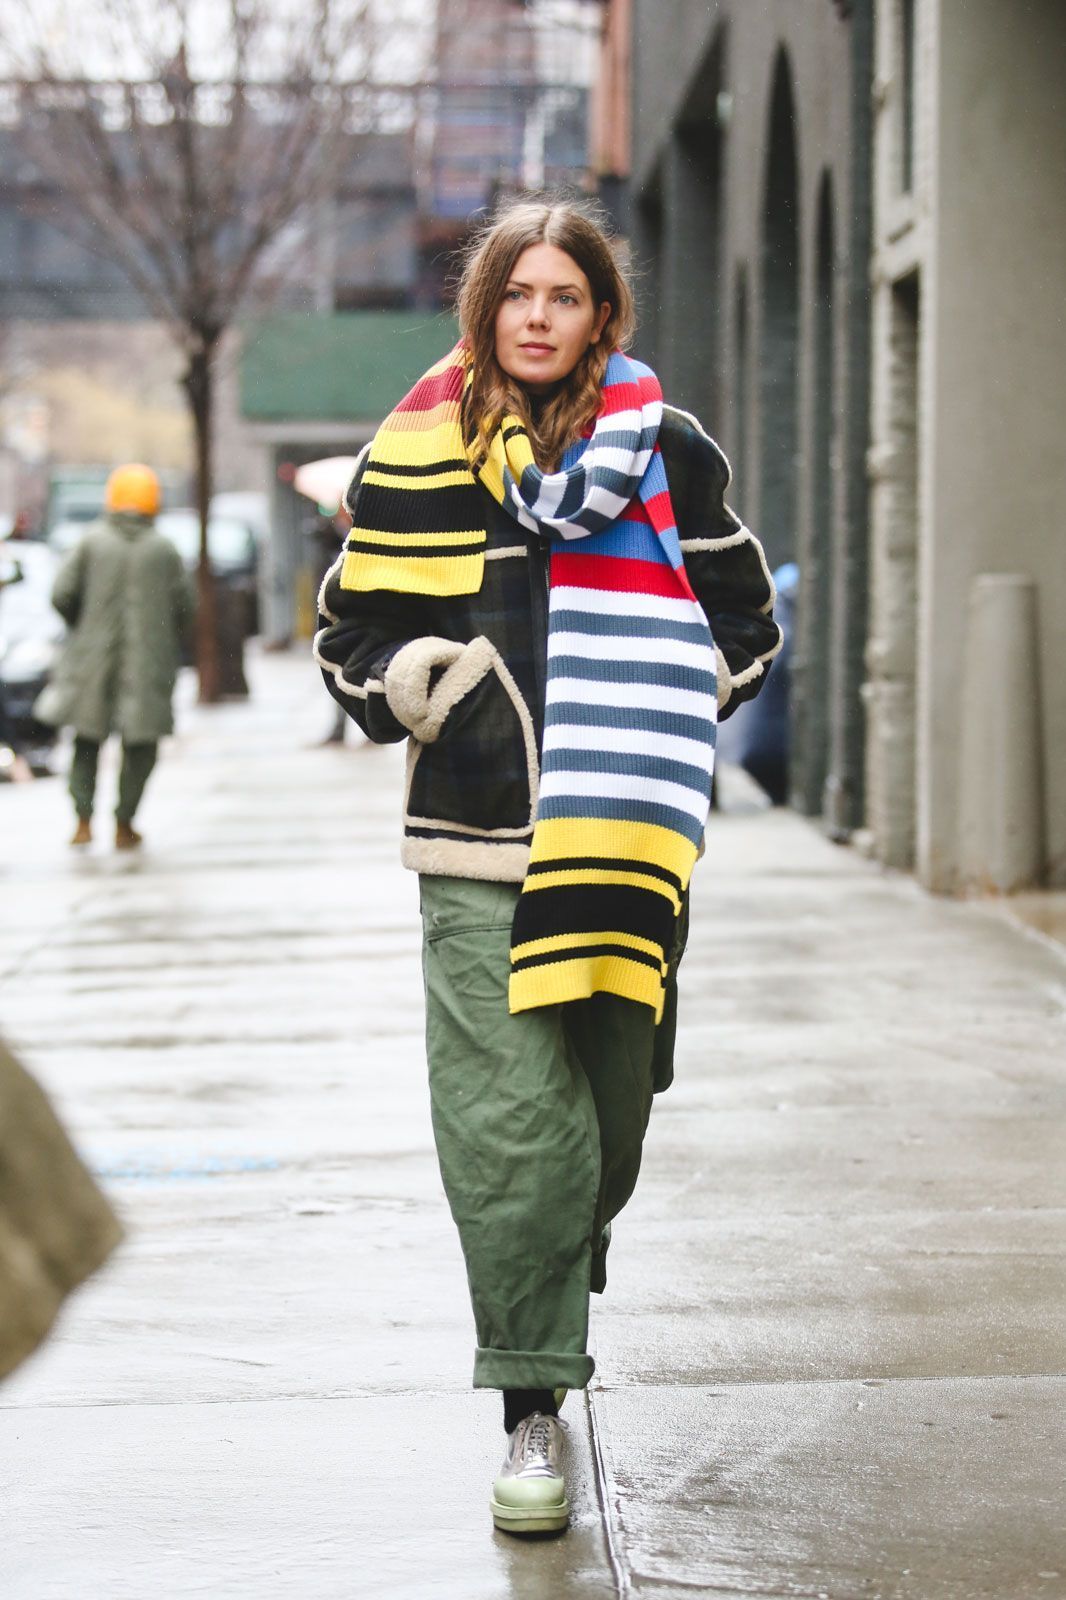 How To Wear A Blanket Scarf Without Looking Like You’re Napping